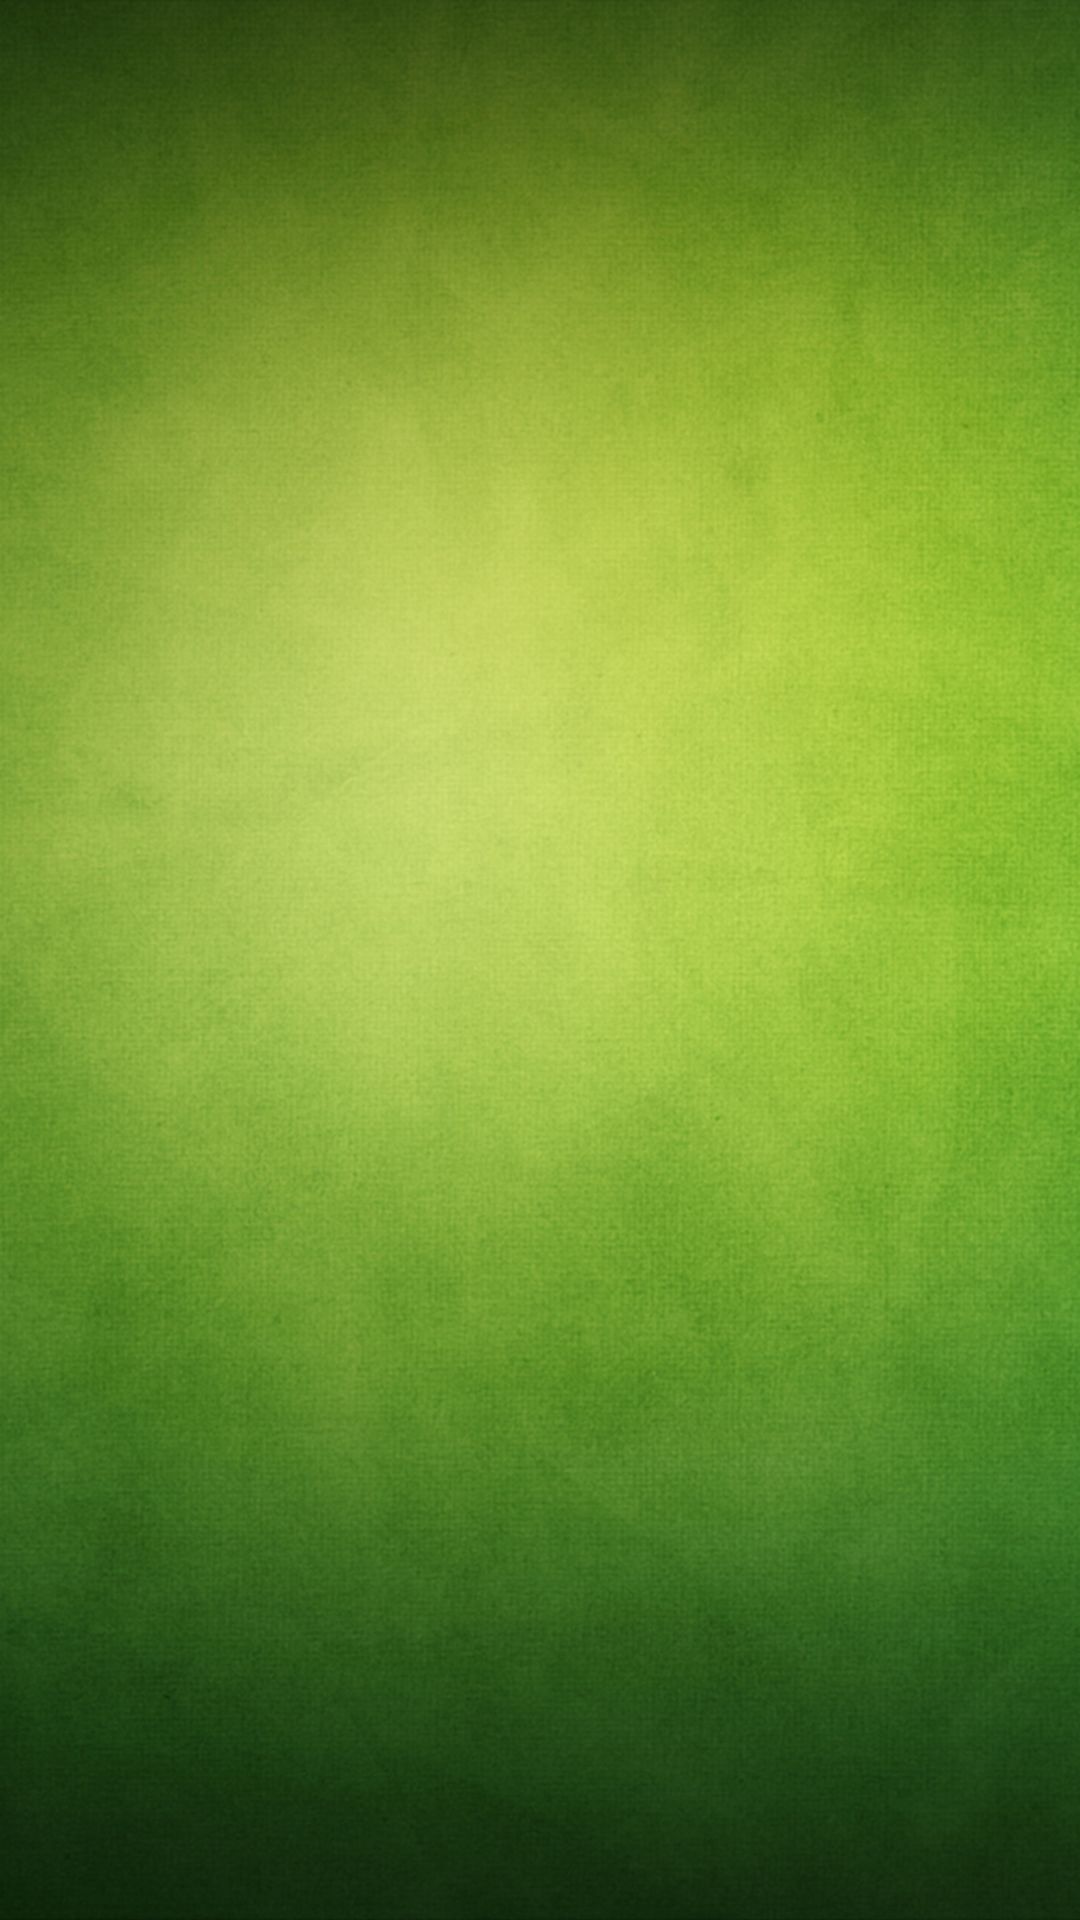 Pure Minimal Simple Green Background iPhone Wallpaper